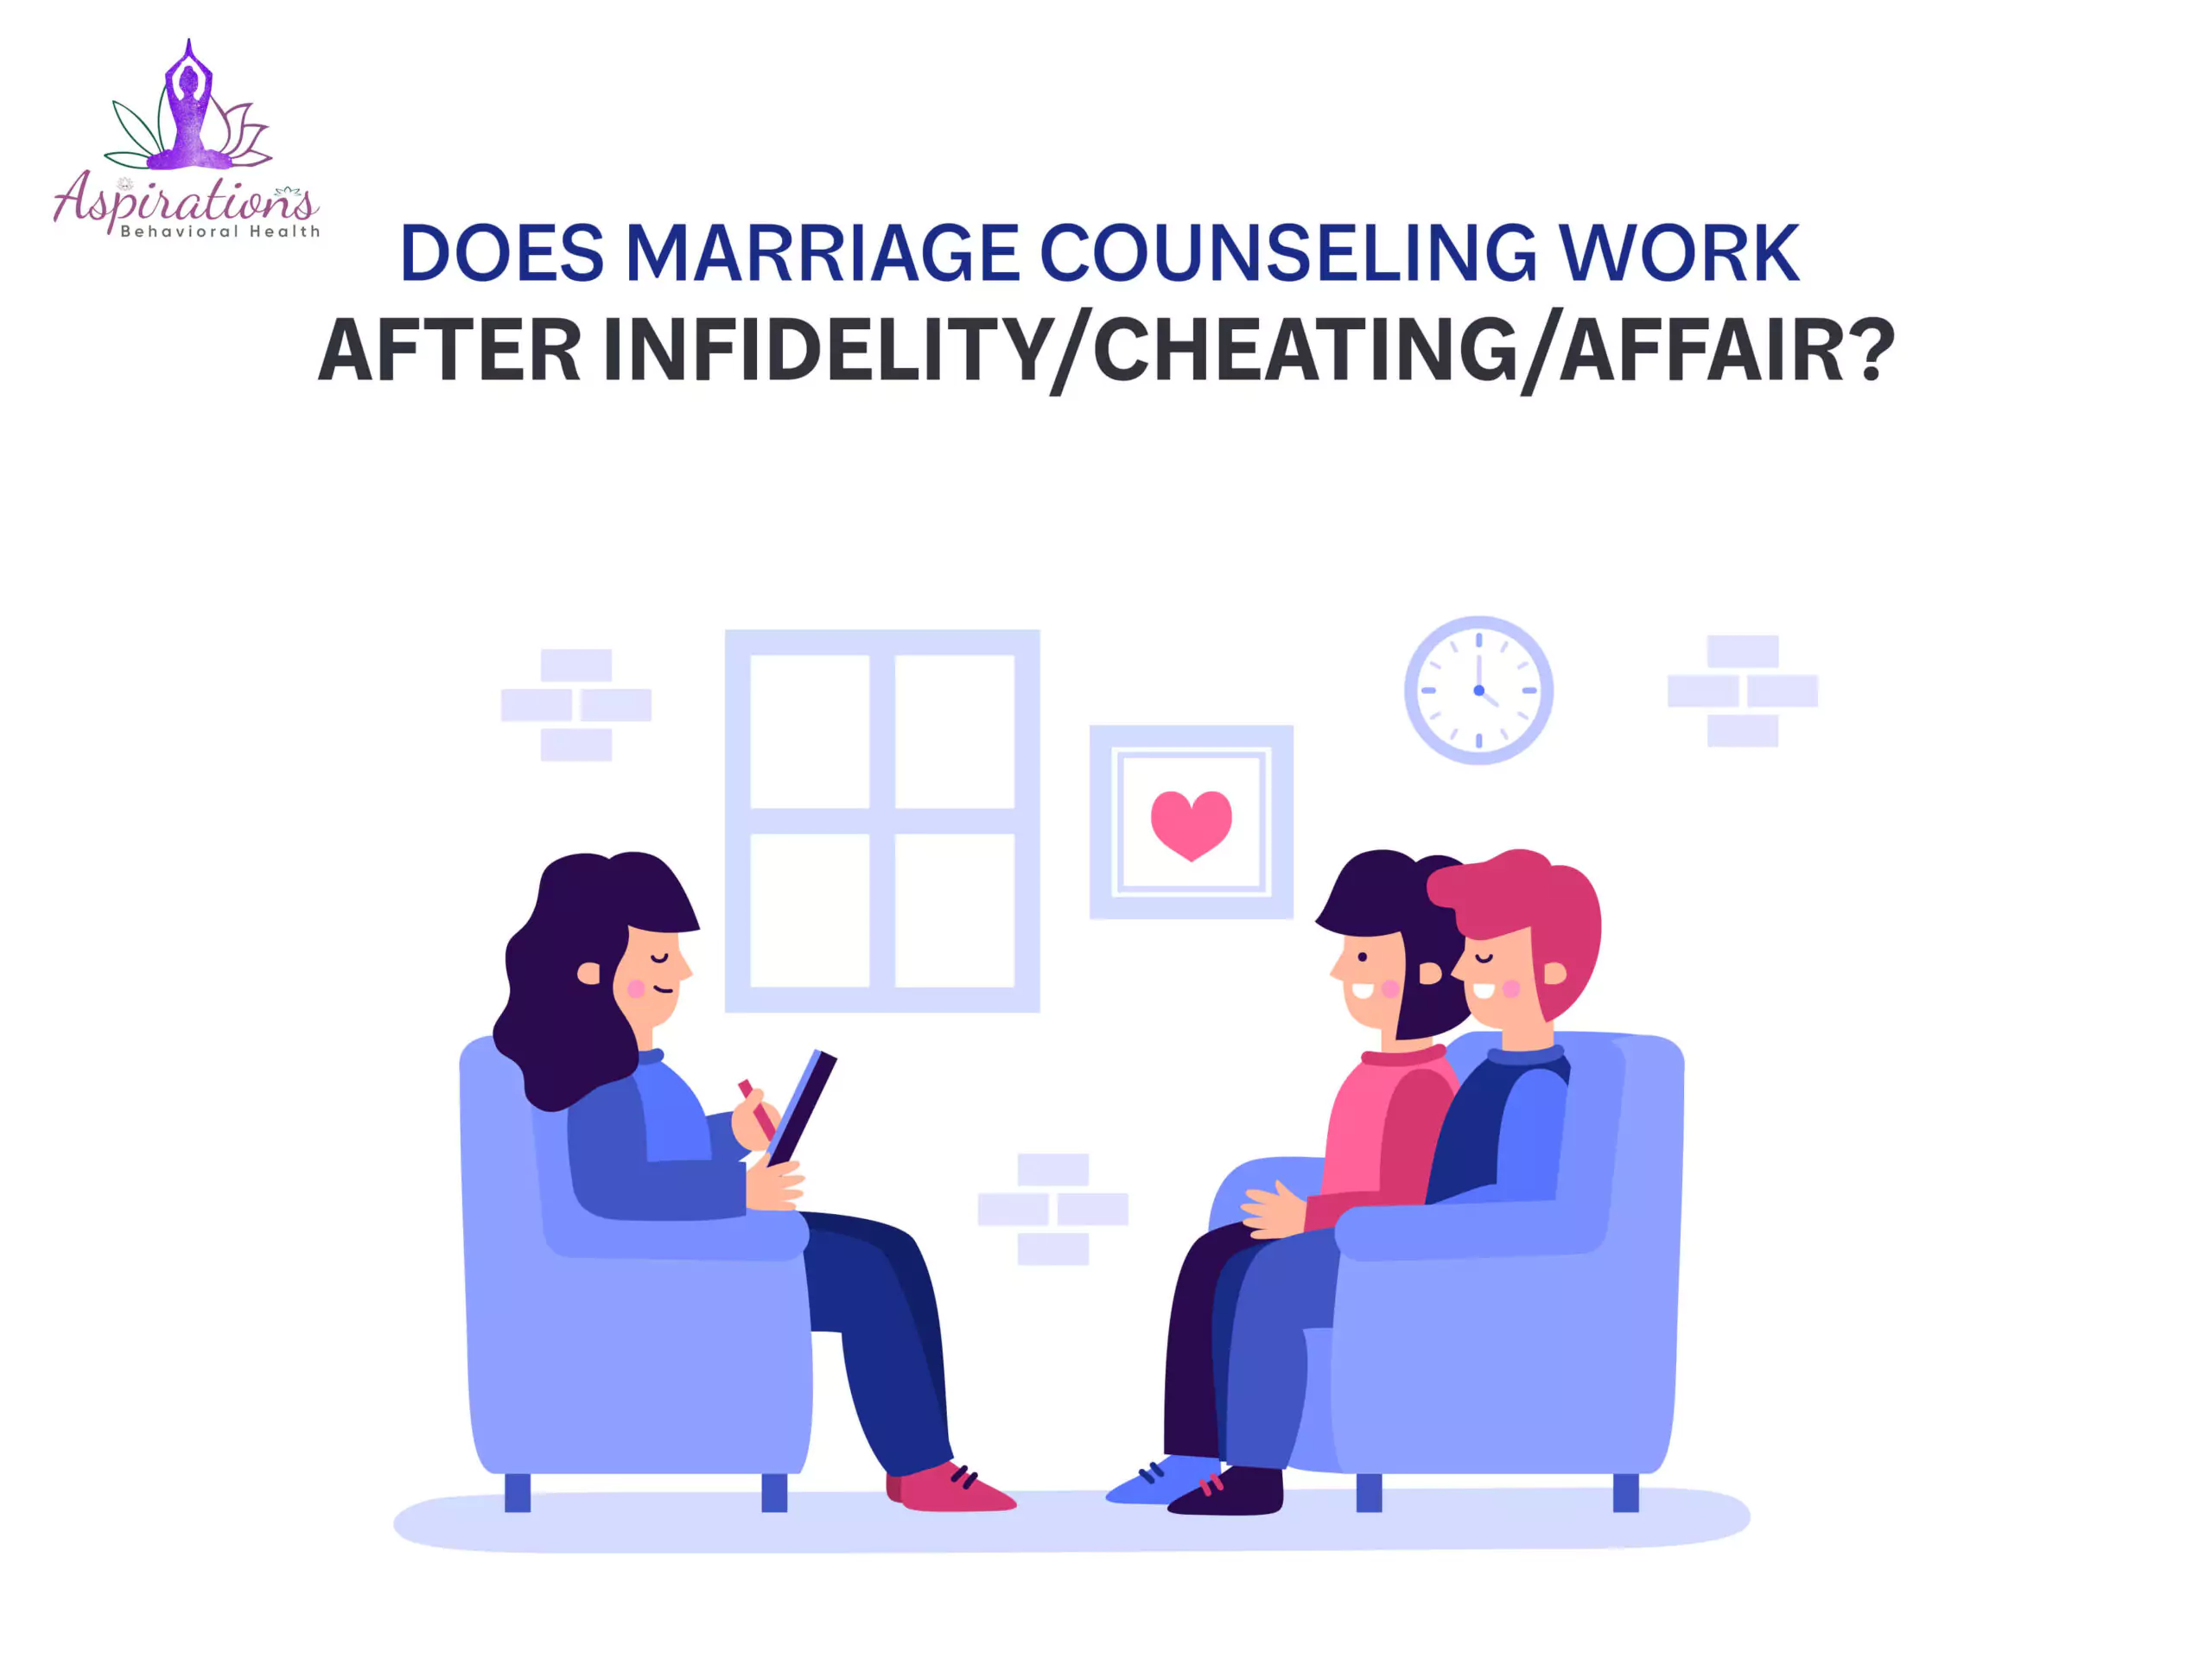 Does Marriage Counseling Work After Infidelity/Cheating/Affair